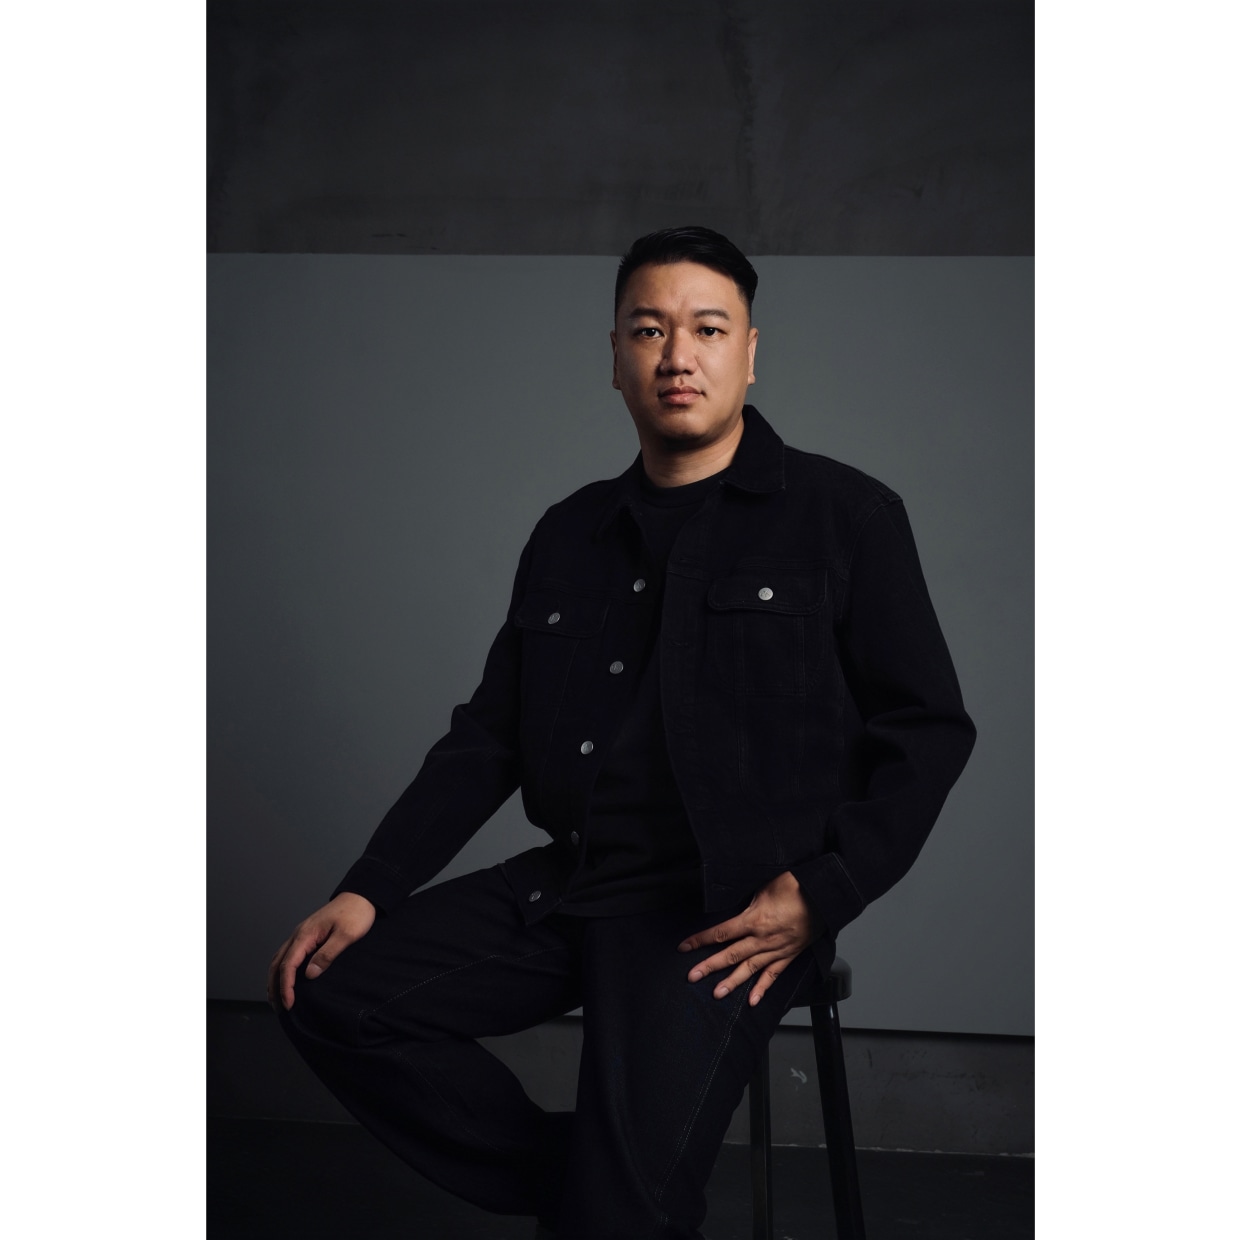 ARTIST: Kong Lingkai Kong Lingkai holds various positions in the field of photography, including Executive Deputy Director of the Professional...